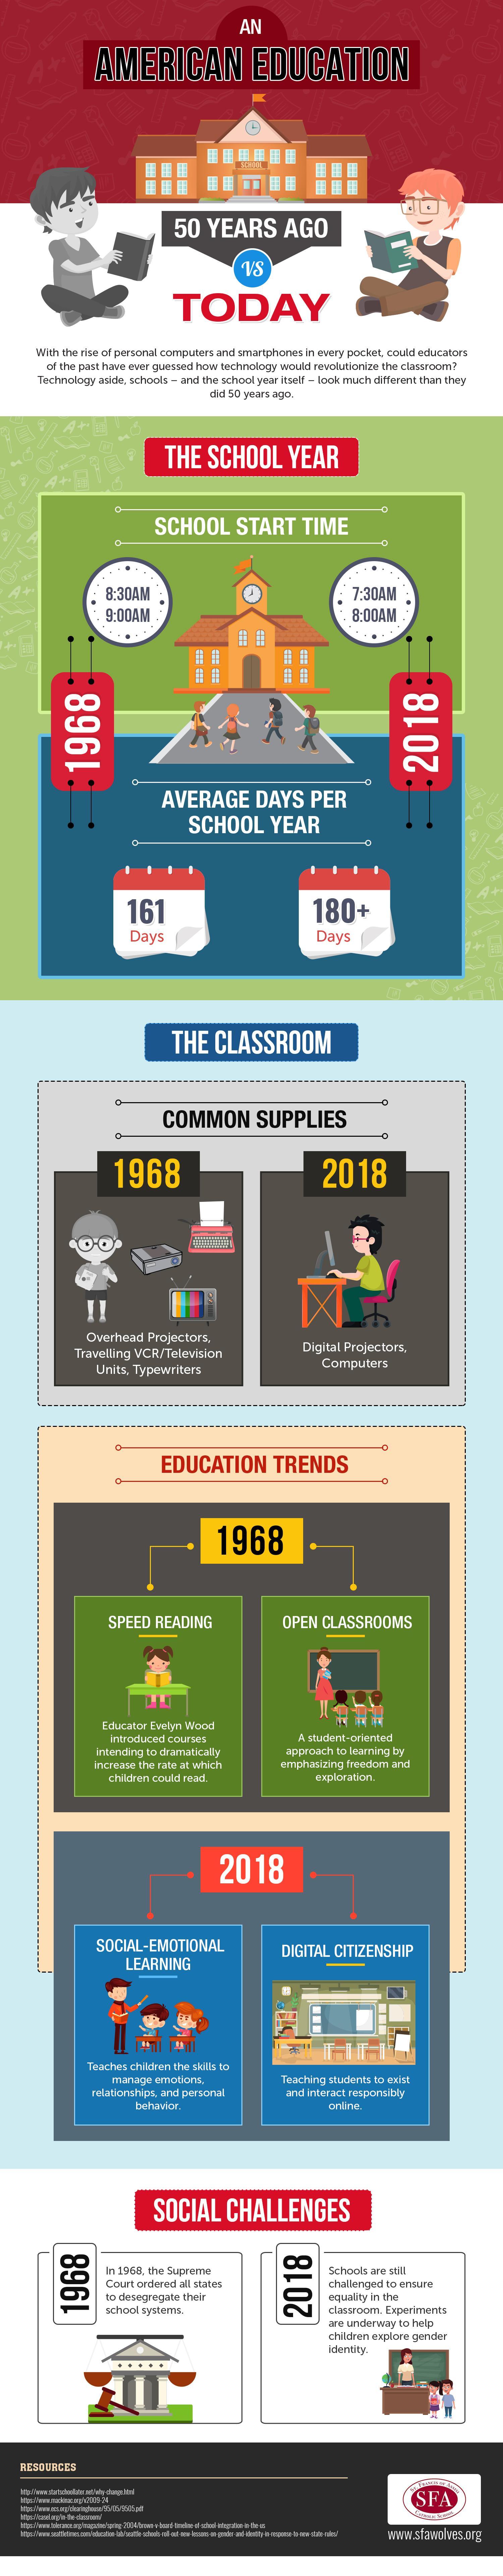 An American Education 50 Years Ago vs Today